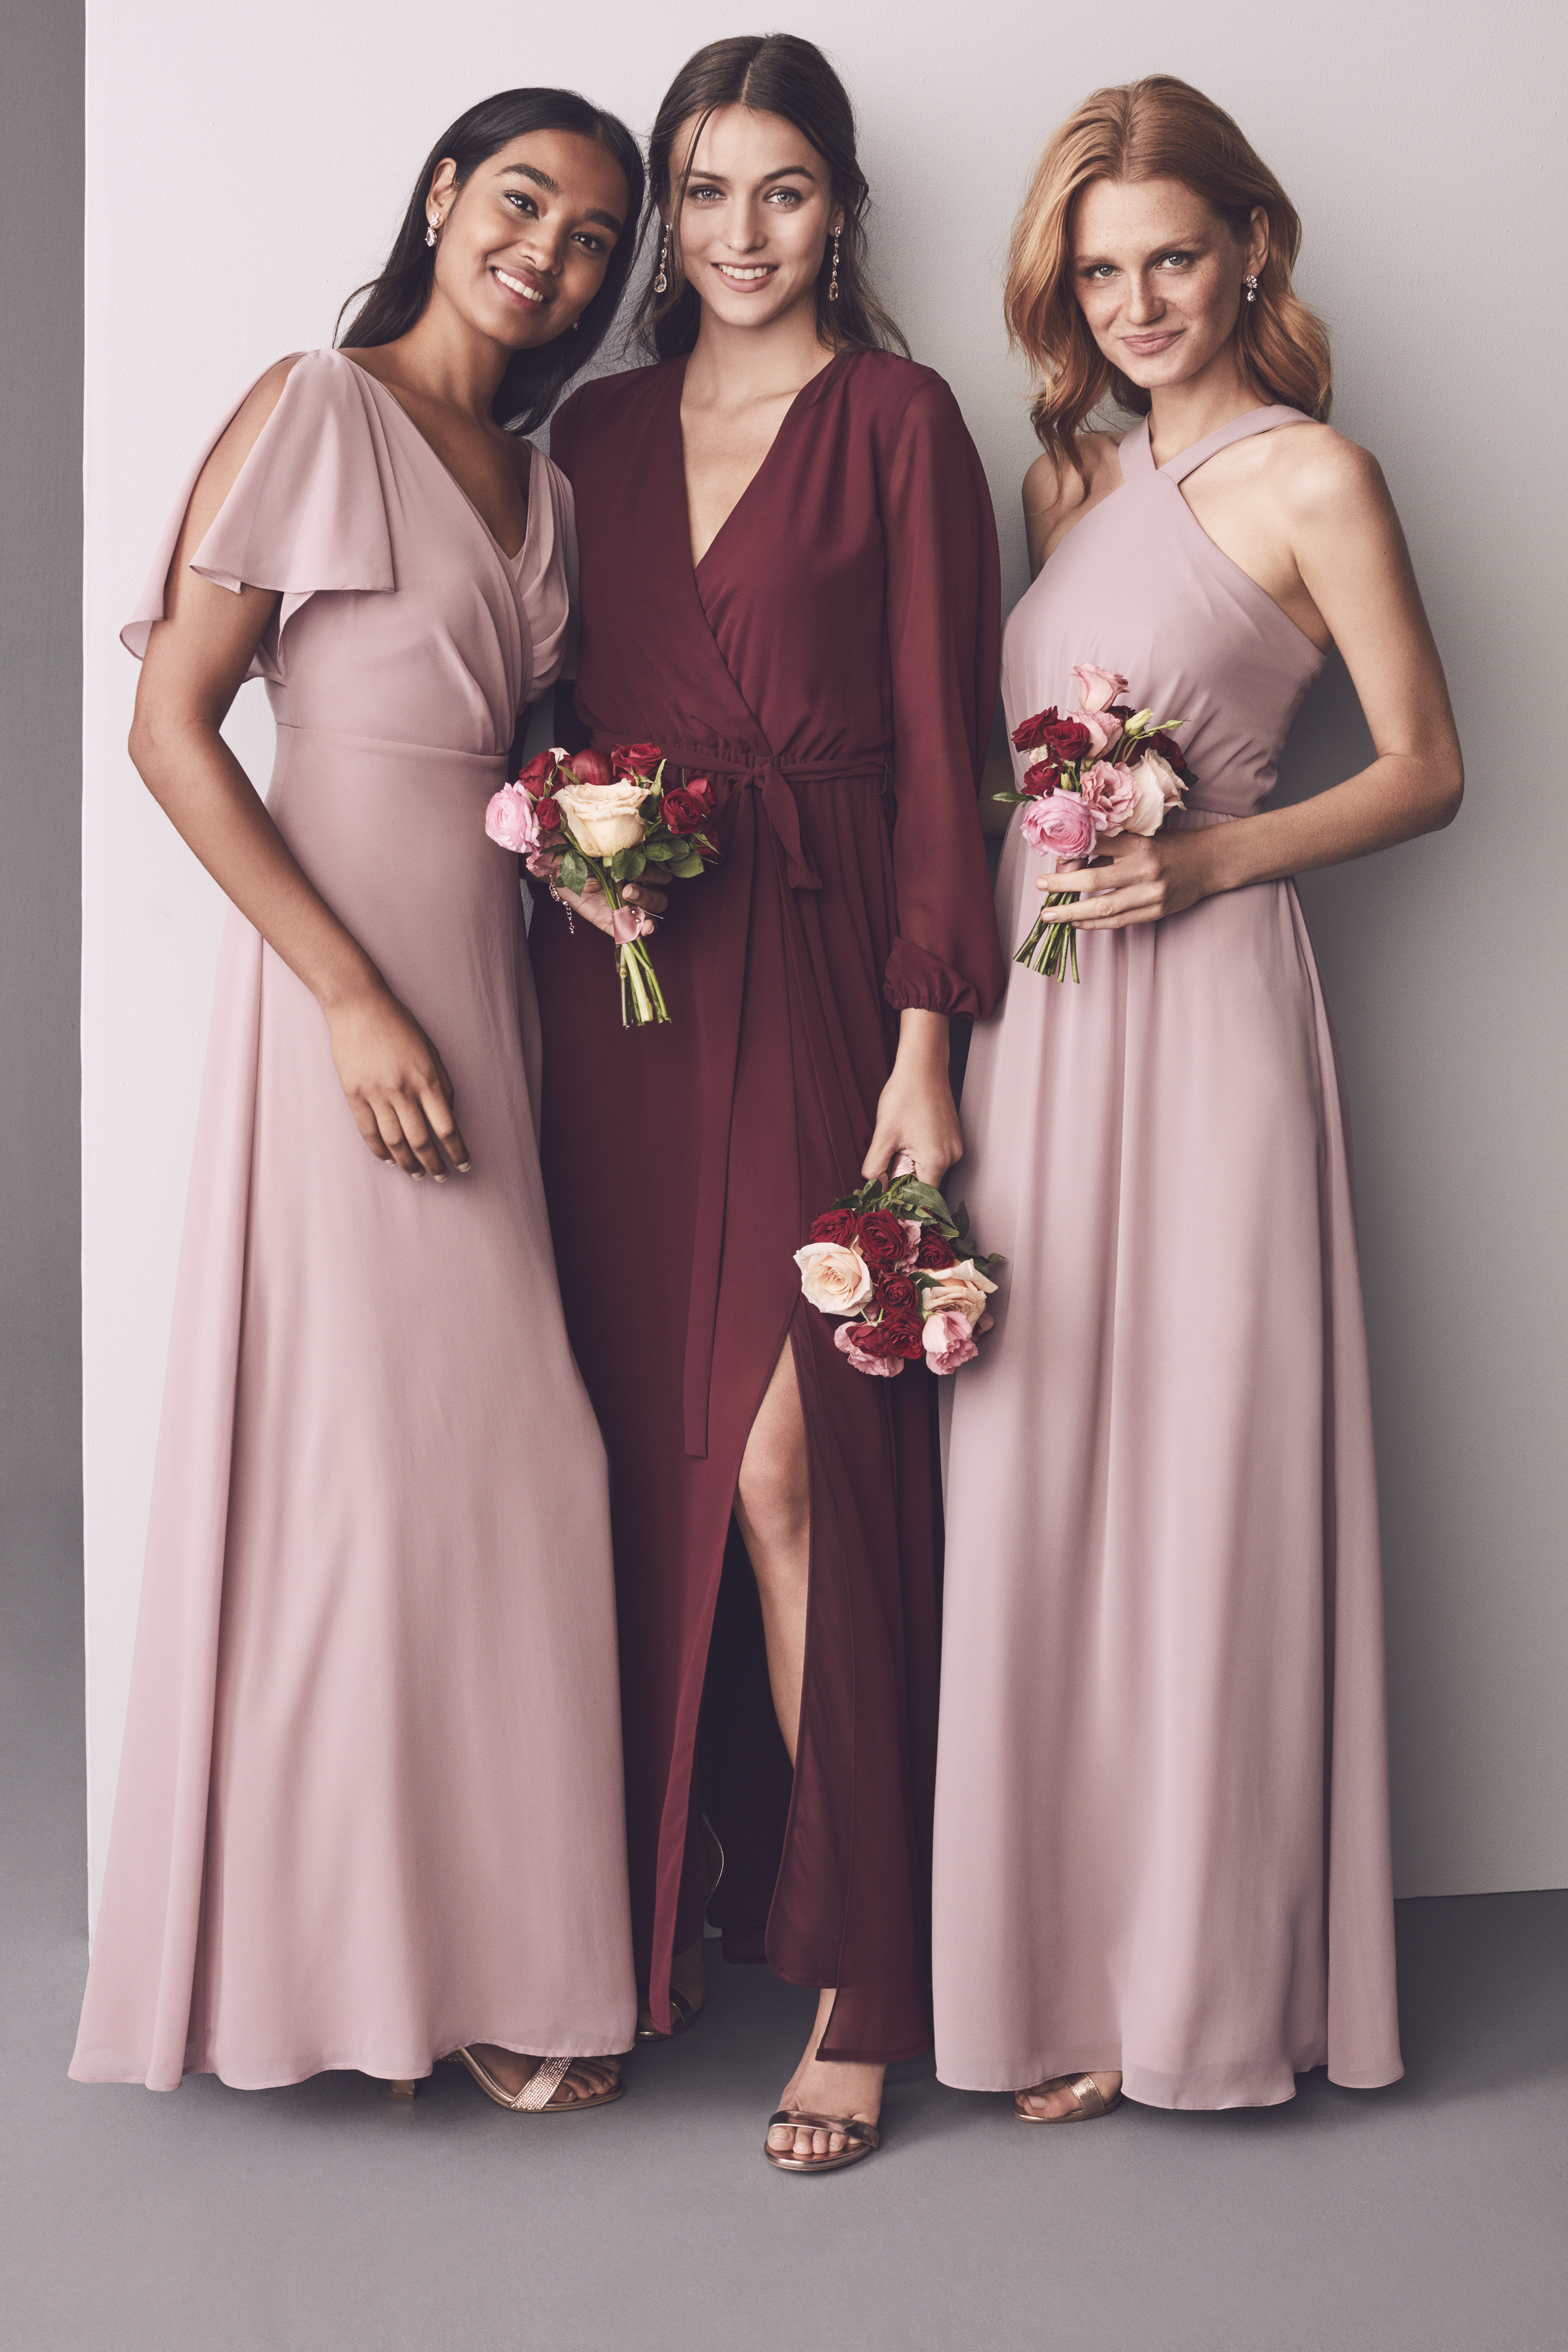 Where to Buy Cheap Bridesmaids Dresses - PureWow